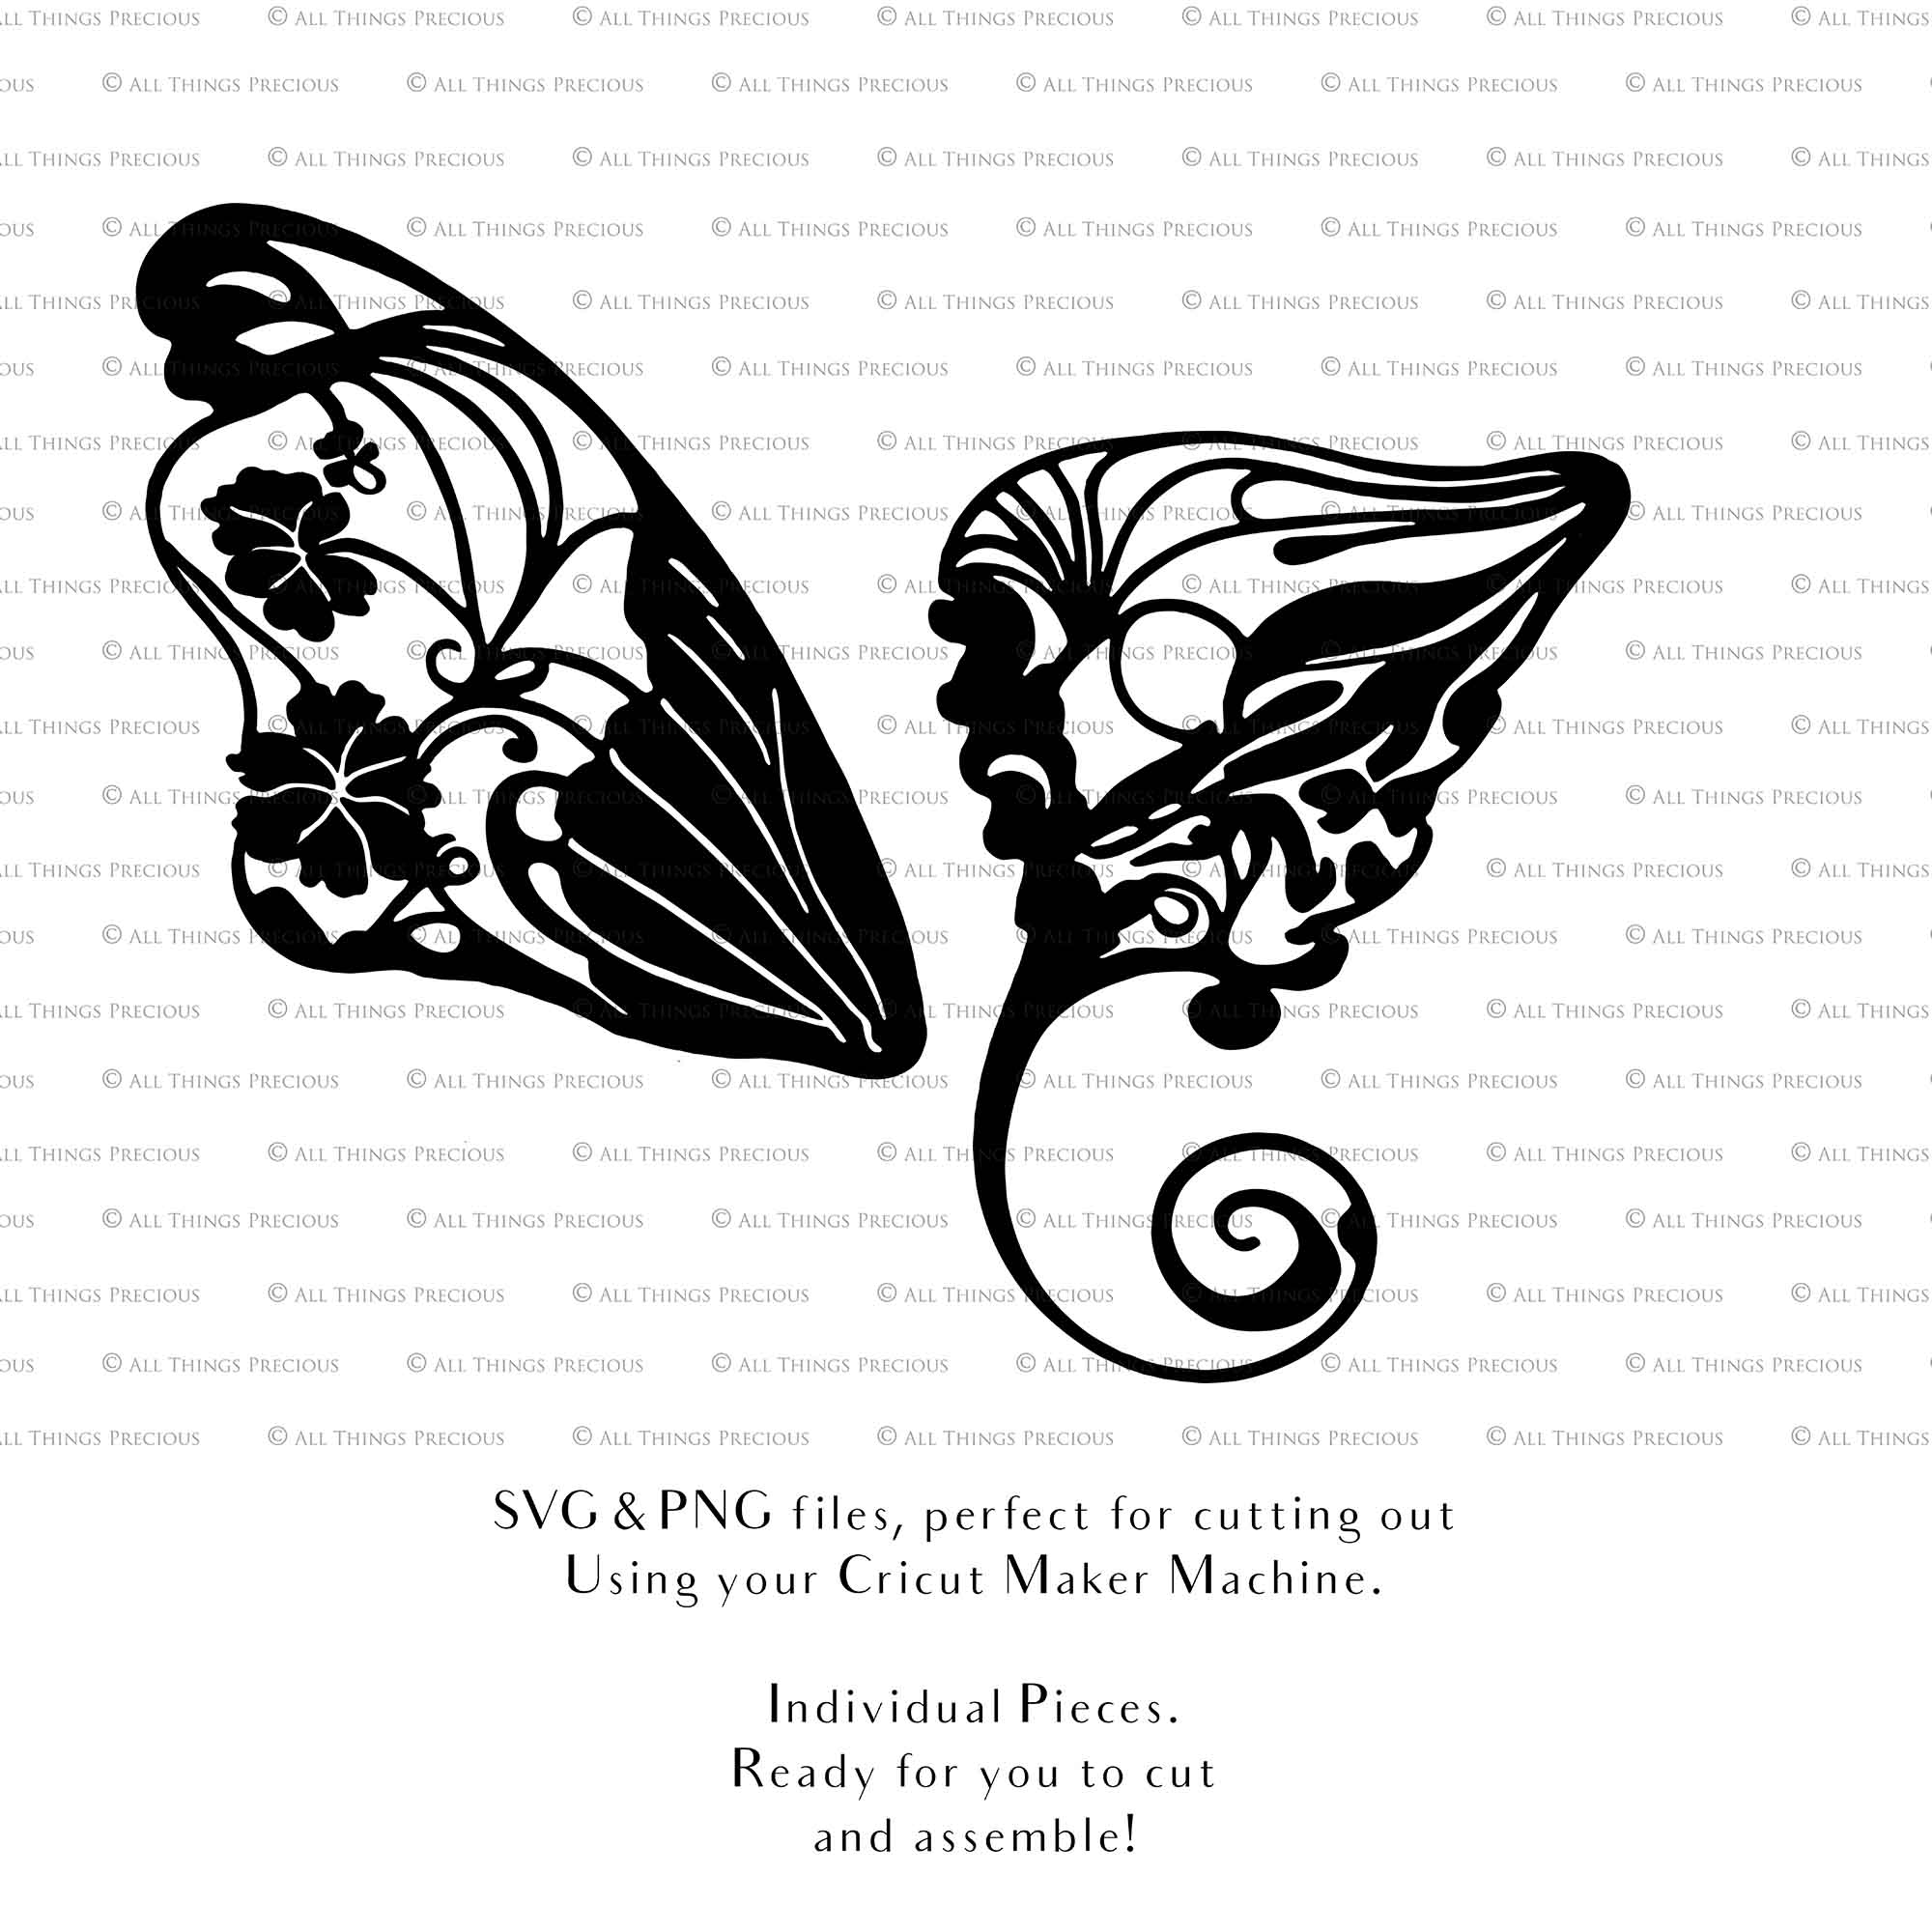 SVG & PNG Fairy Wing files for Cricut or Silhouette Cameo Cutting Machine. To create wearable fairy wings, in adult or children sizes. Graphic design for Halloween Costumes, Fantasy or Cosplay or photography. Print for weddings, engagements, baby shower invitations. DIY Printable. Fairycore, Cottagecore.